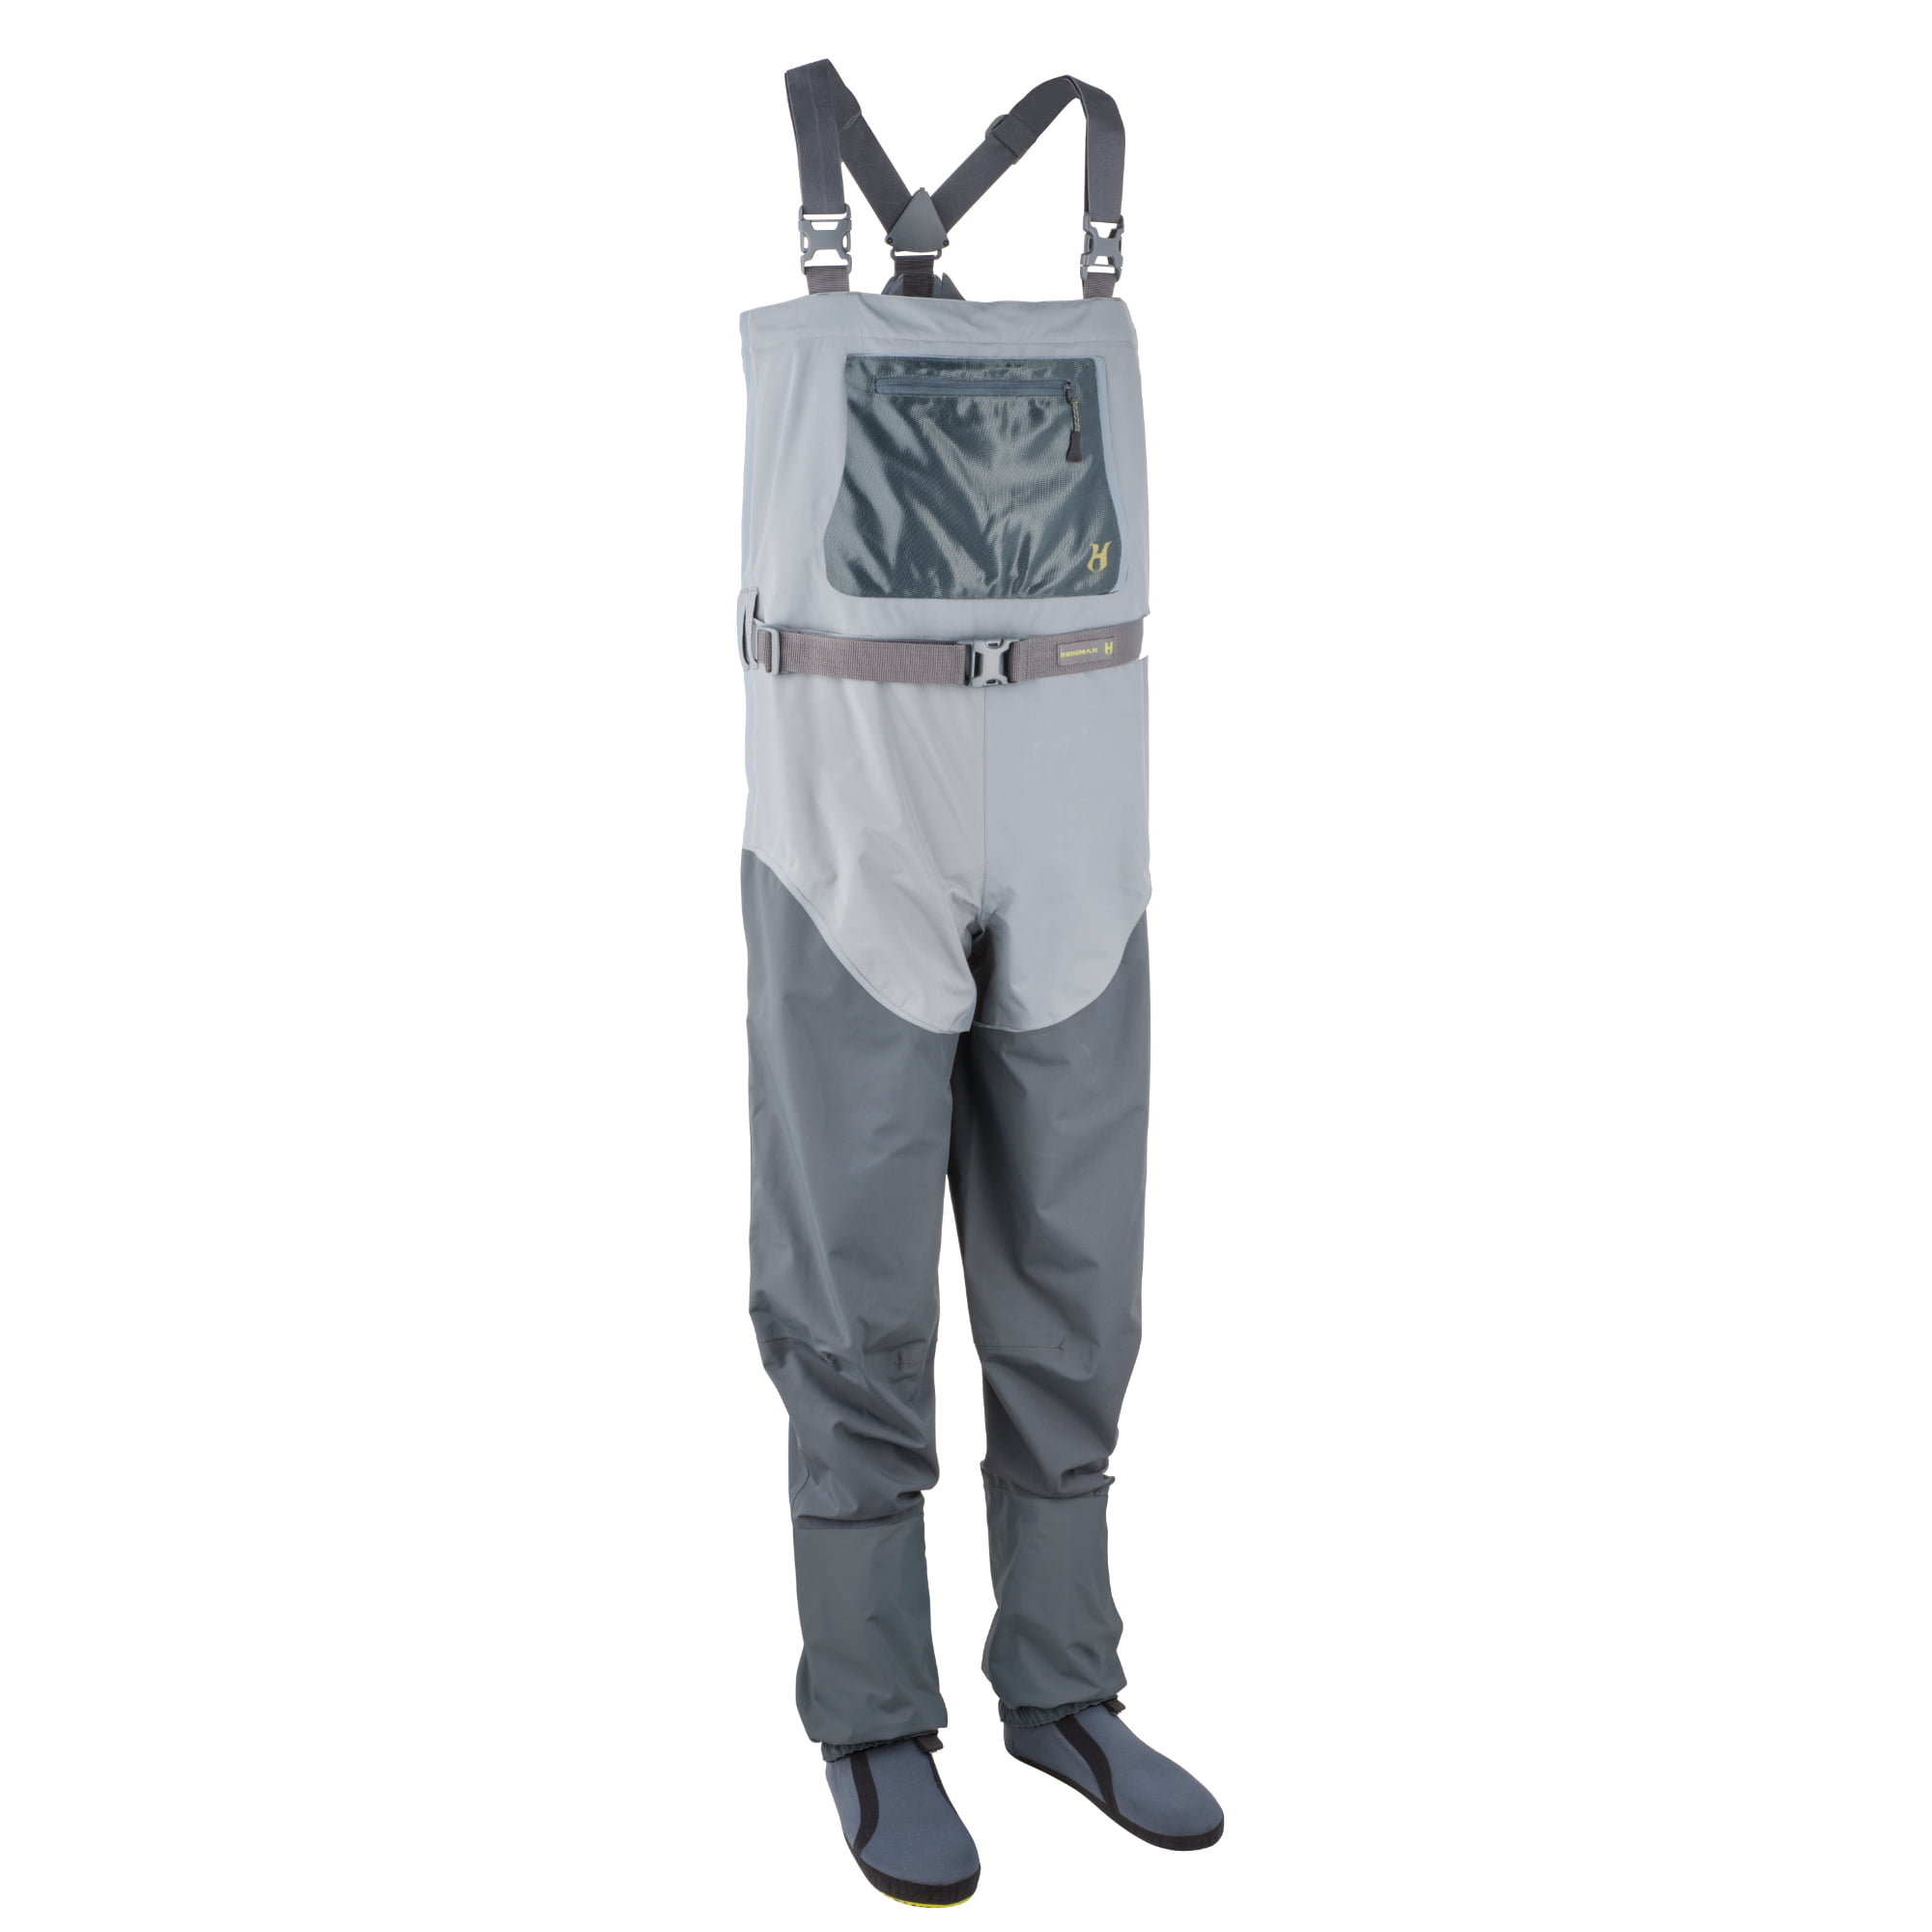 Hodgman H3 Stocking Foot Chest Waders 